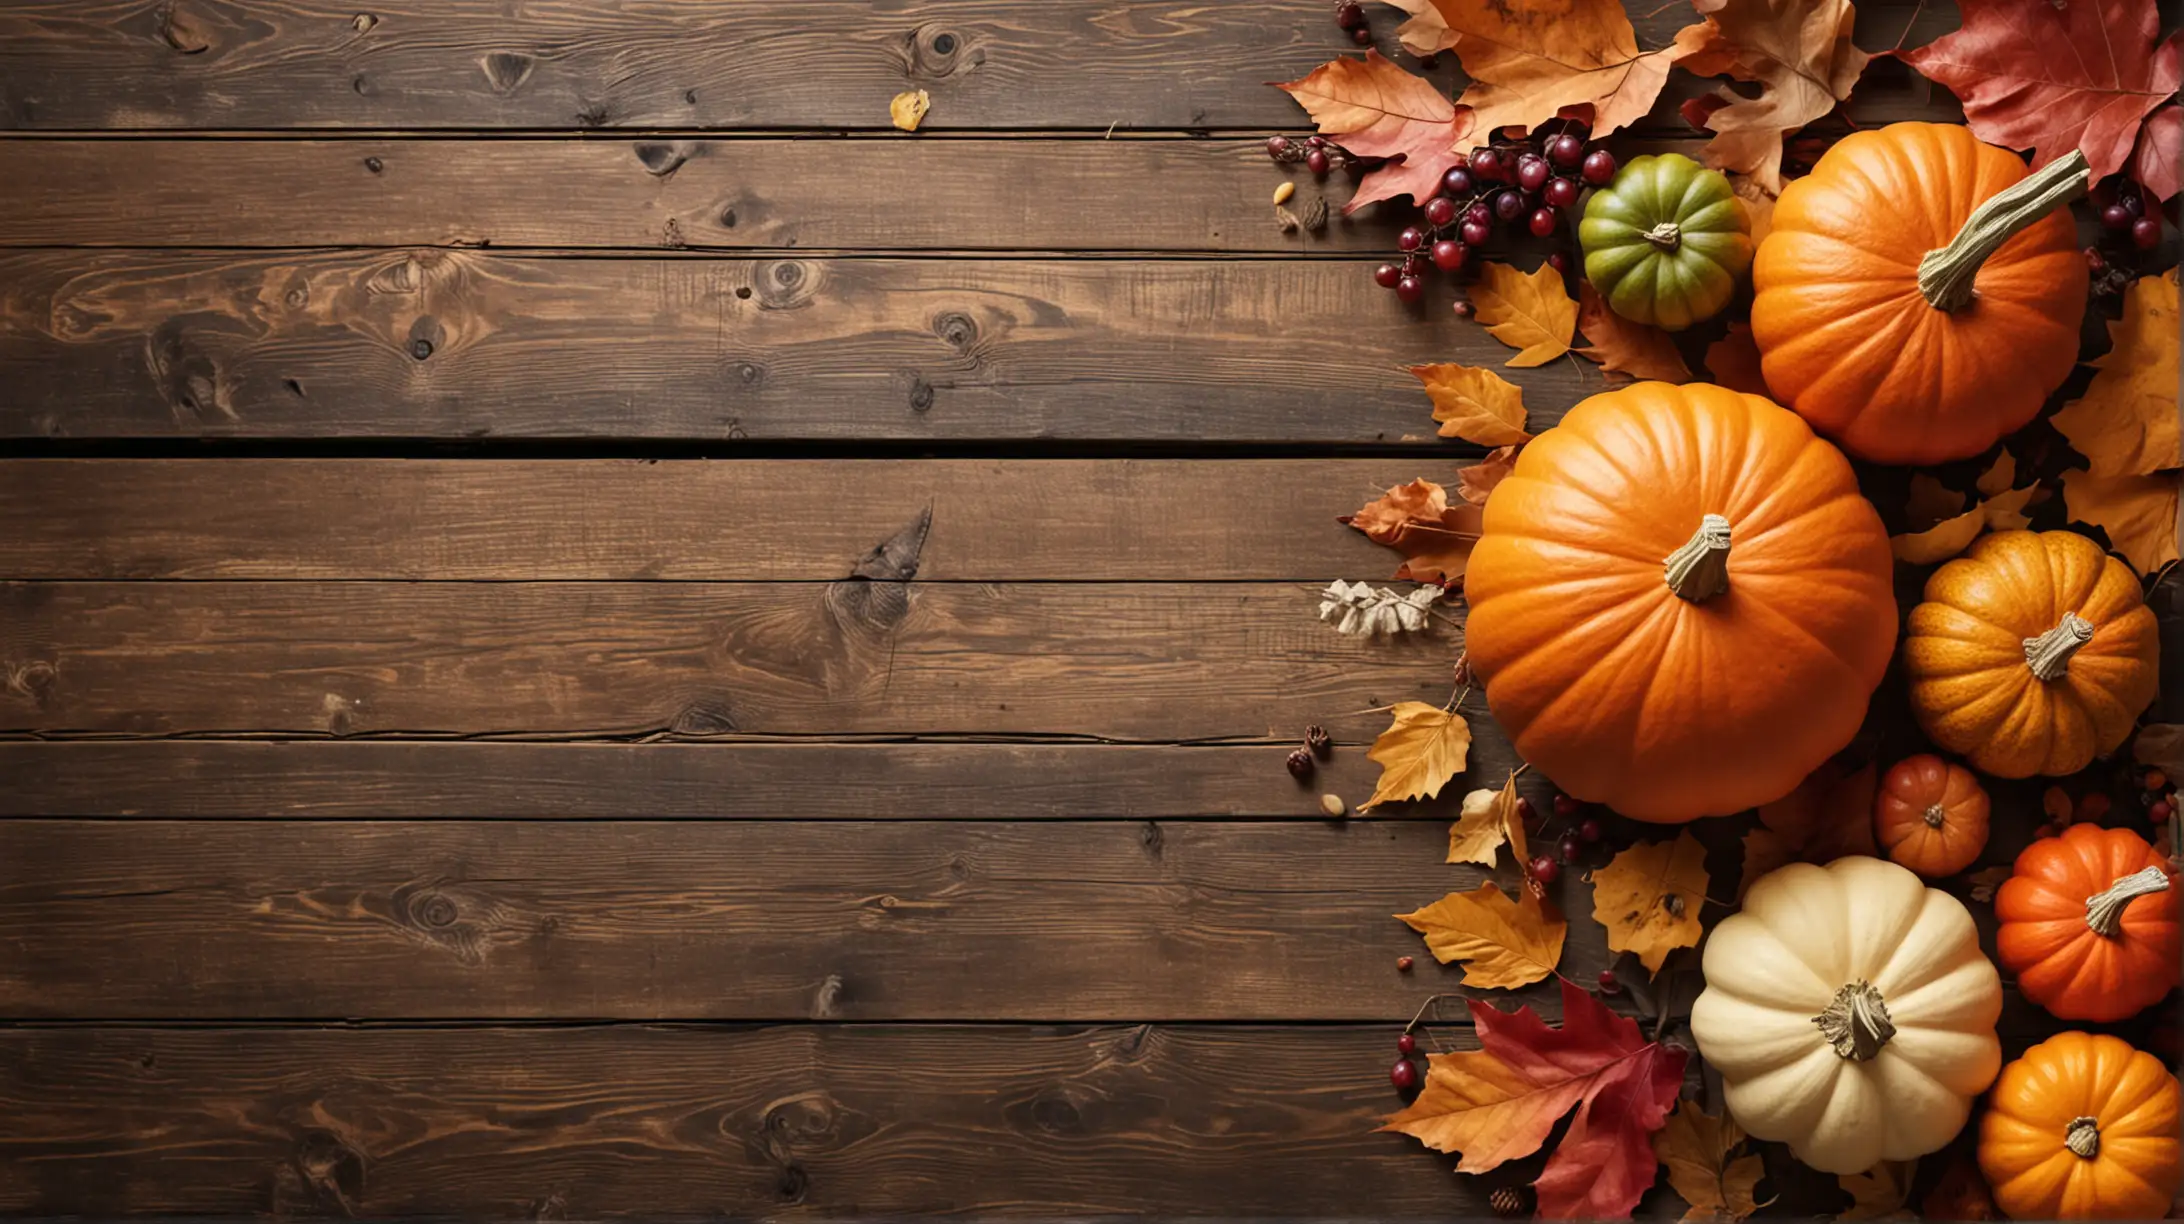 Thanksgiving Harvest Colorful Pumpkins Fruits and Fall Leaves on Rustic Wooden Background